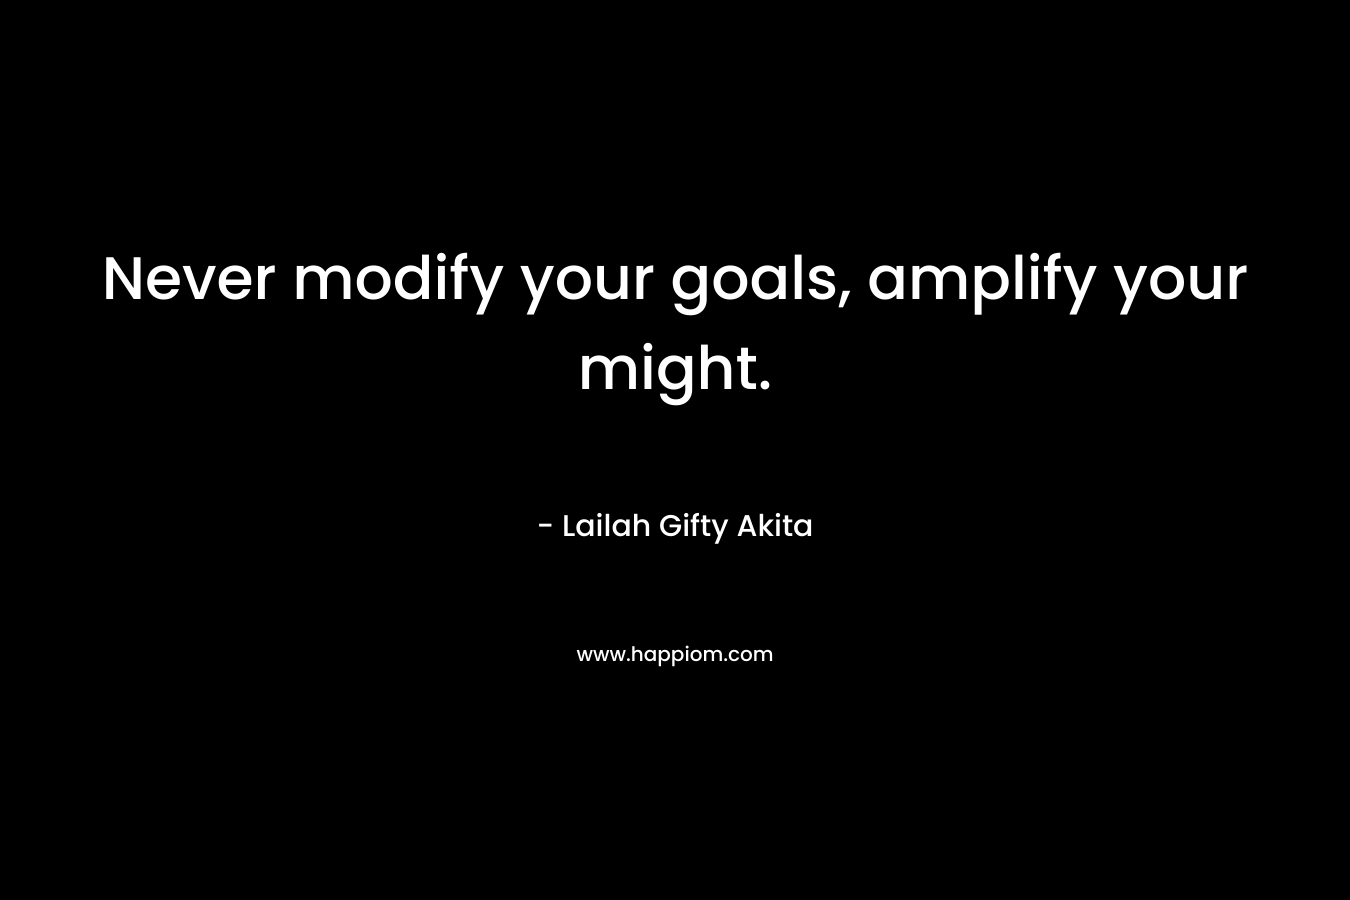 Never modify your goals, amplify your might. – Lailah Gifty Akita